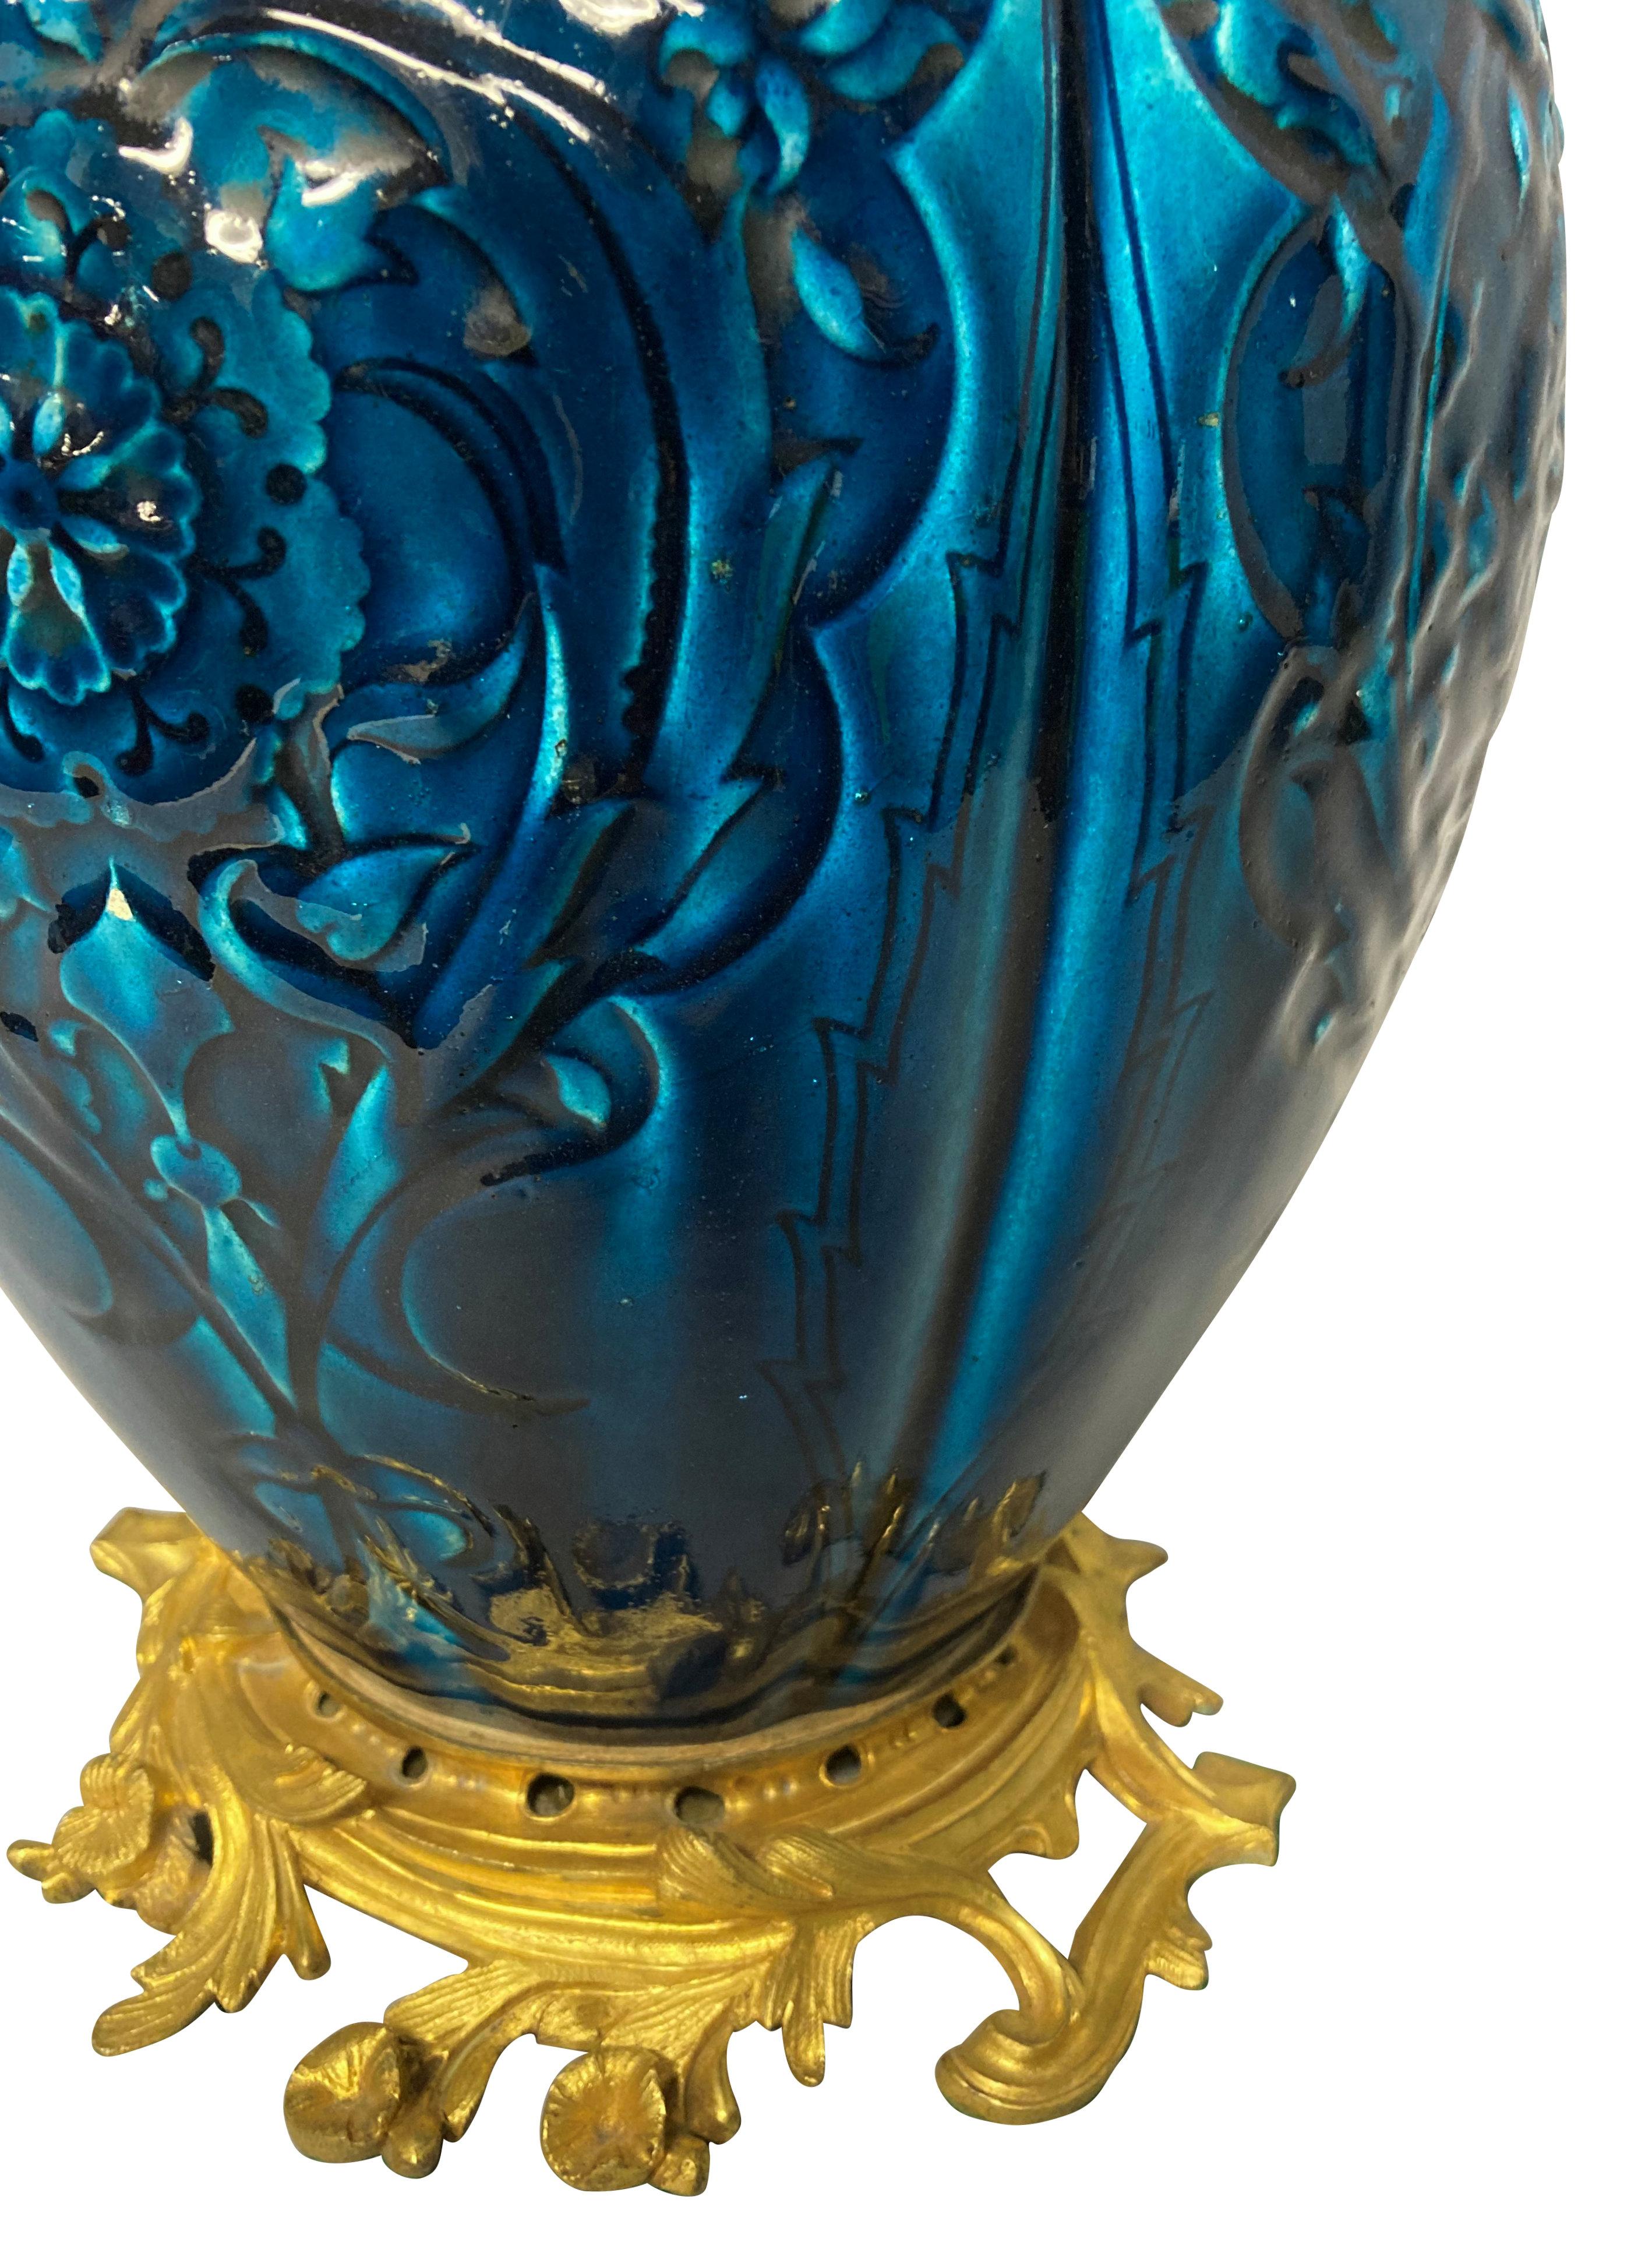 A Chinese blue glazed ceramic porcelain vase with floral decoration, mounted on an a finely cast gilt bronze stand, with gilt bronze and brass fittings.